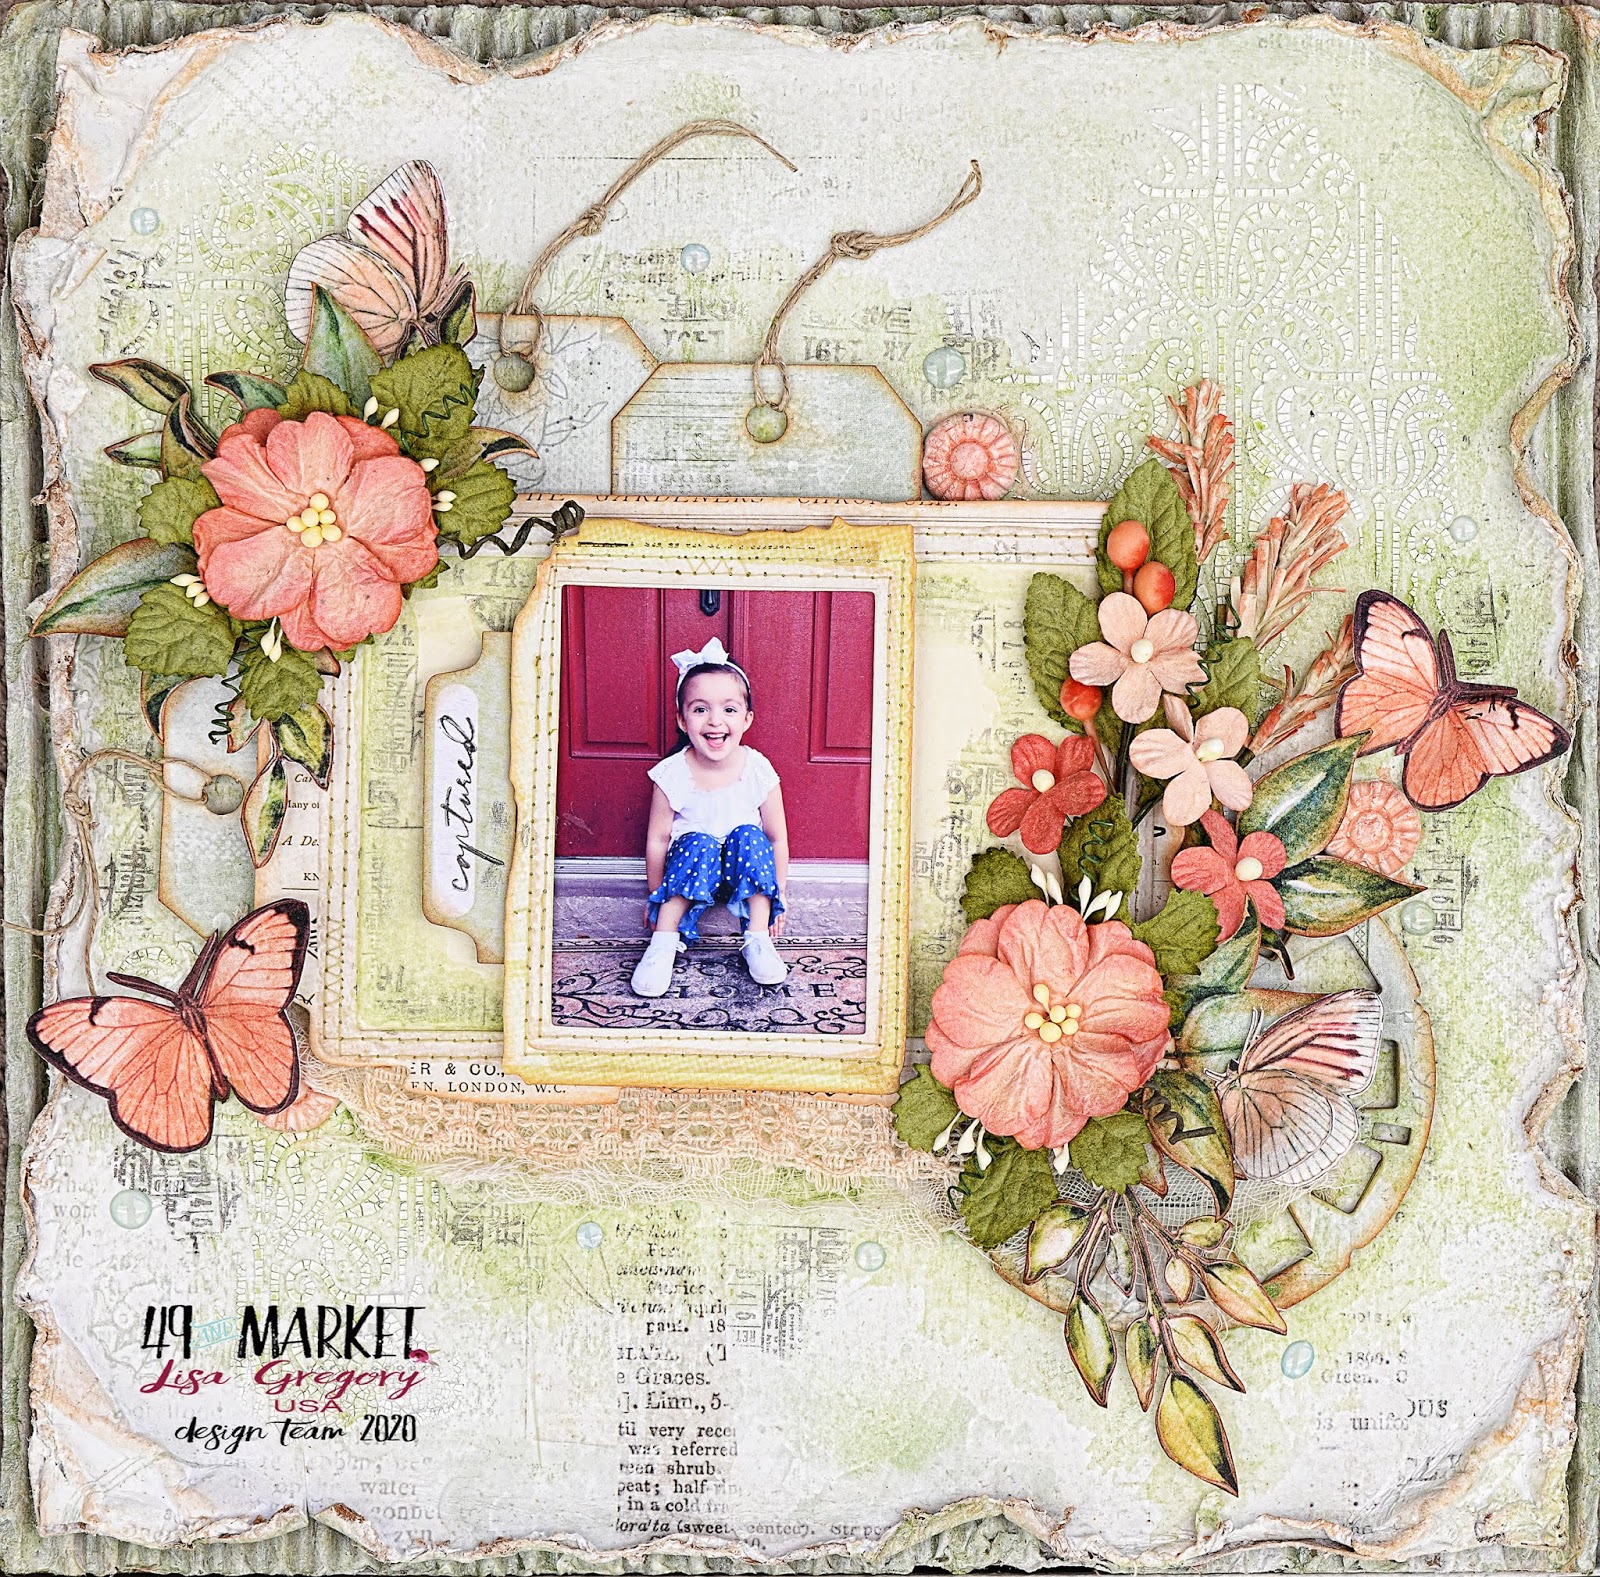 49 and Market - Vintage Artistry Shore 6x6 Paper Pack